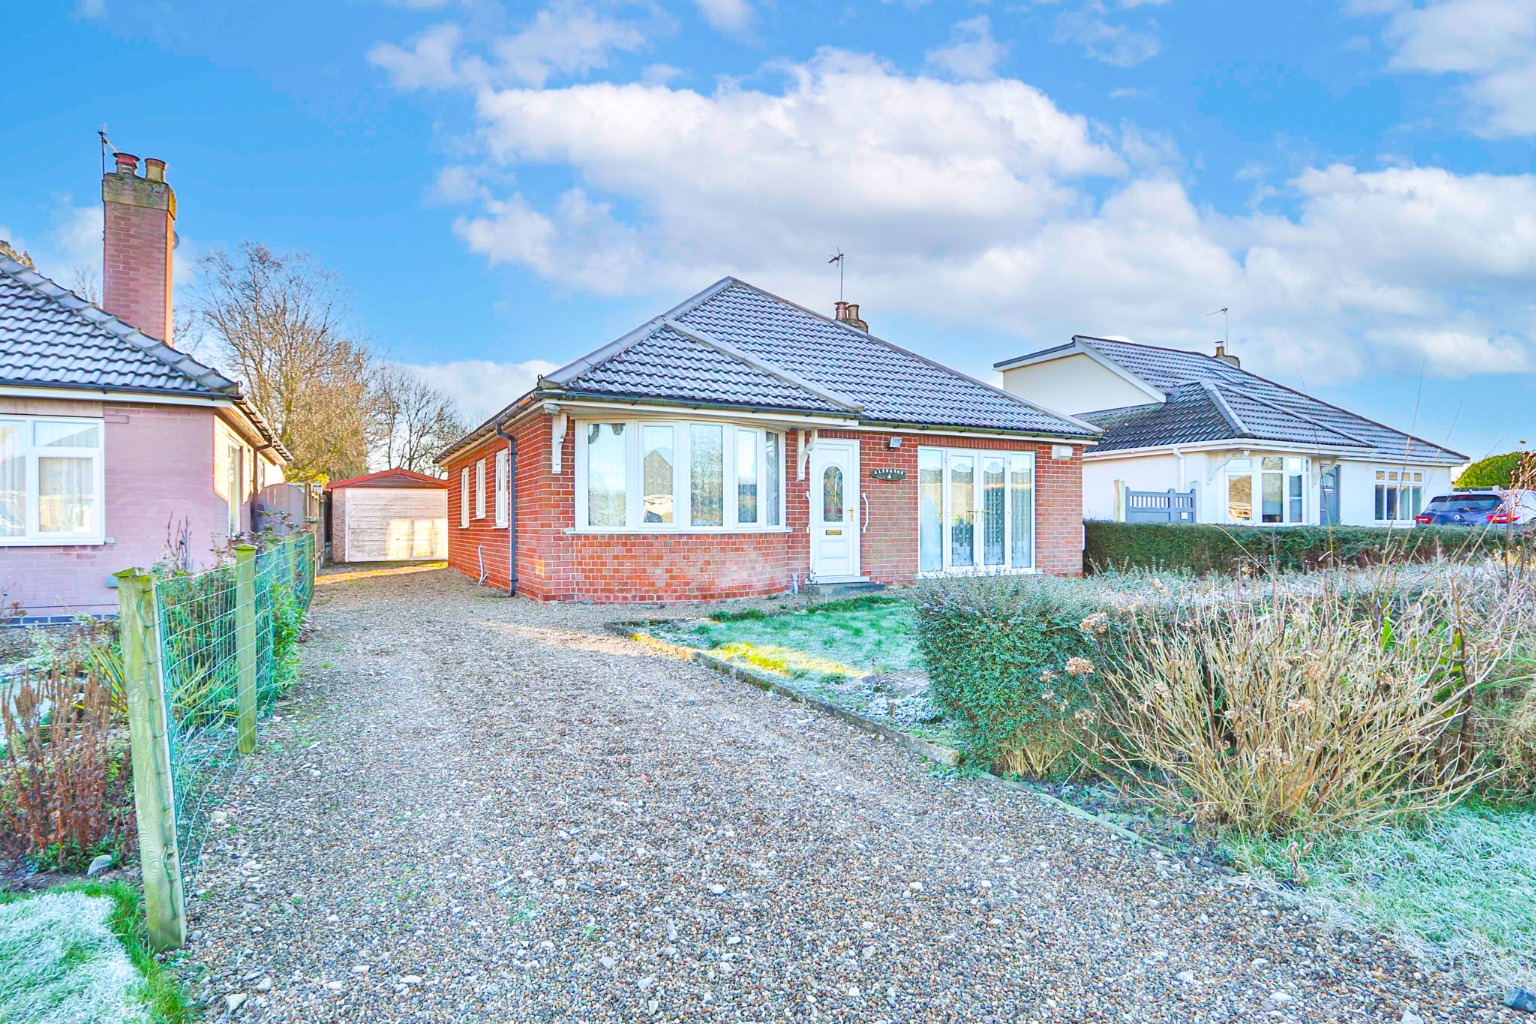 3 bed detached bungalow for sale - Property Image 1